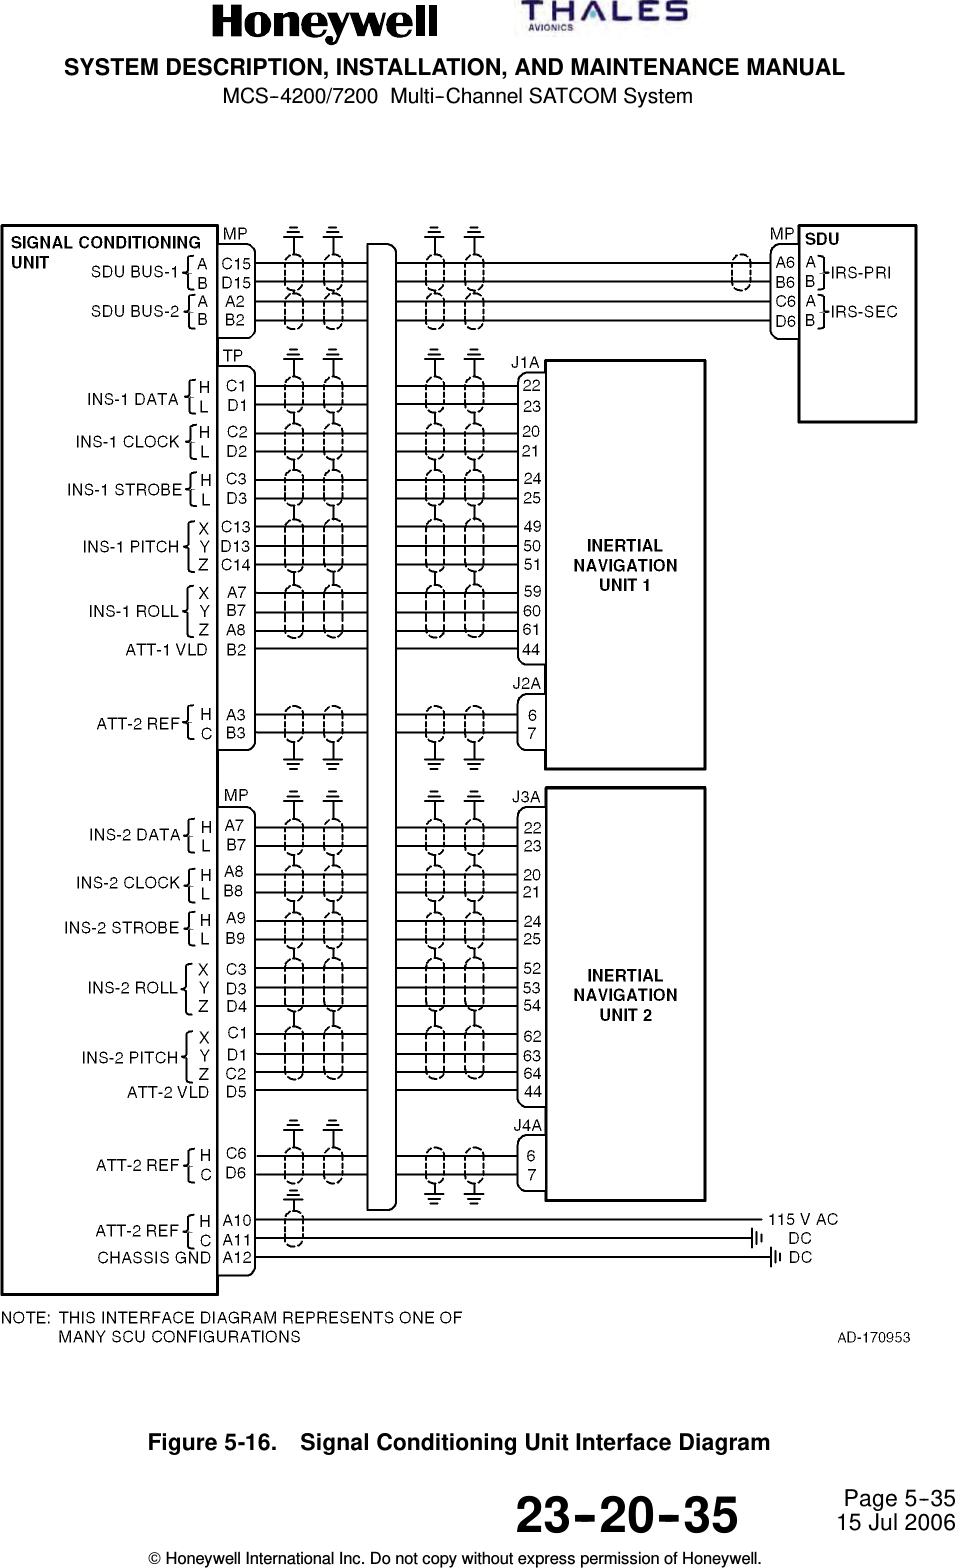 SYSTEM DESCRIPTION, INSTALLATION, AND MAINTENANCE MANUALMCS--4200/7200 Multi--Channel SATCOM System23--20--35 15 Jul 2006Honeywell International Inc. Do not copy without express permission of Honeywell.Page 5--35Figure 5-16. Signal Conditioning Unit Interface Diagram